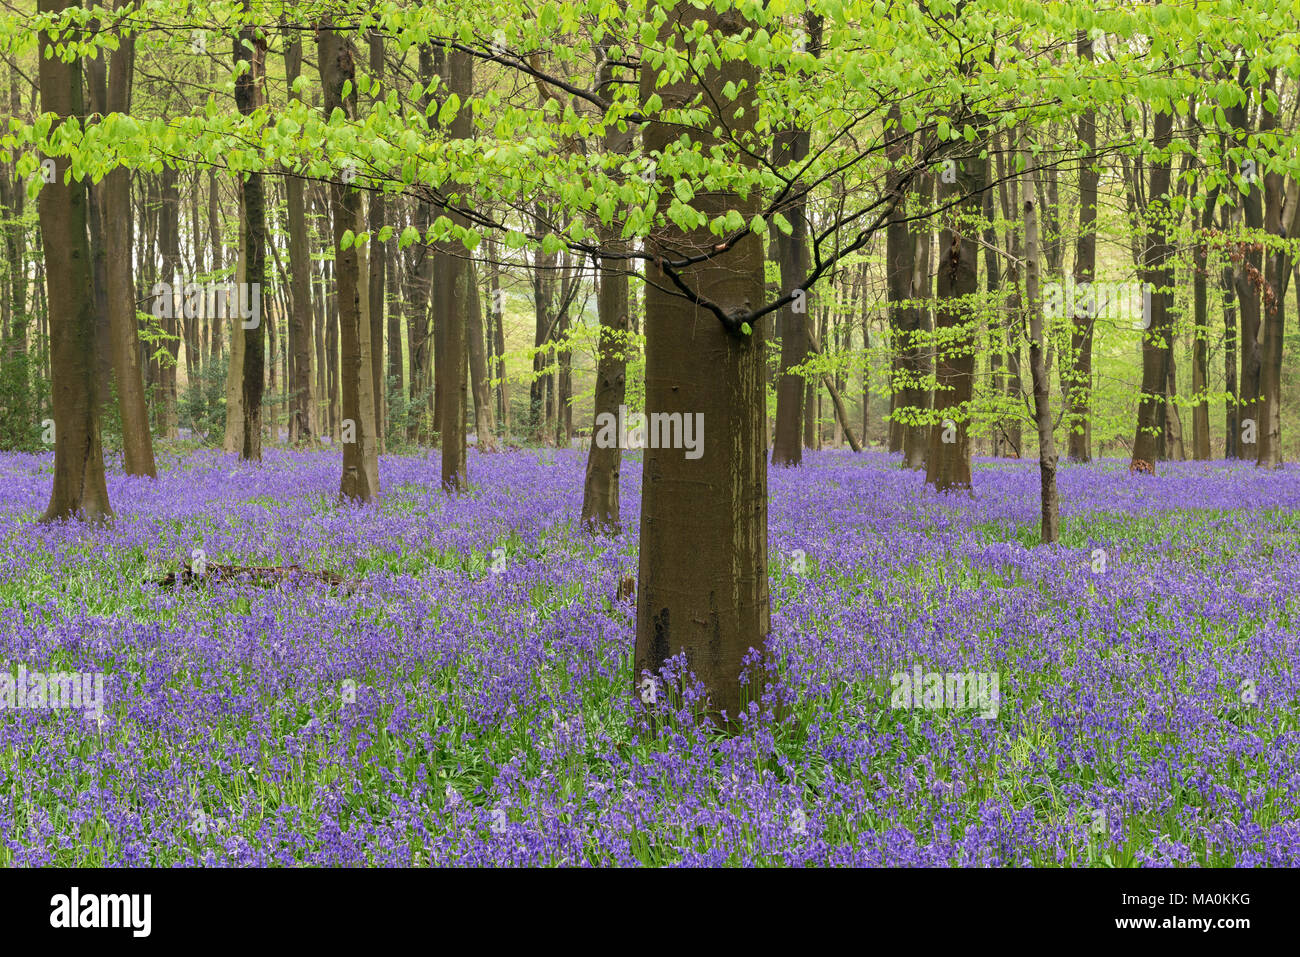 Bluebells carpet the woodland floor beneath the lime green leaves of a young Beech tree in woods near to Micheldever in Hampshire, England. An overnig Stock Photo